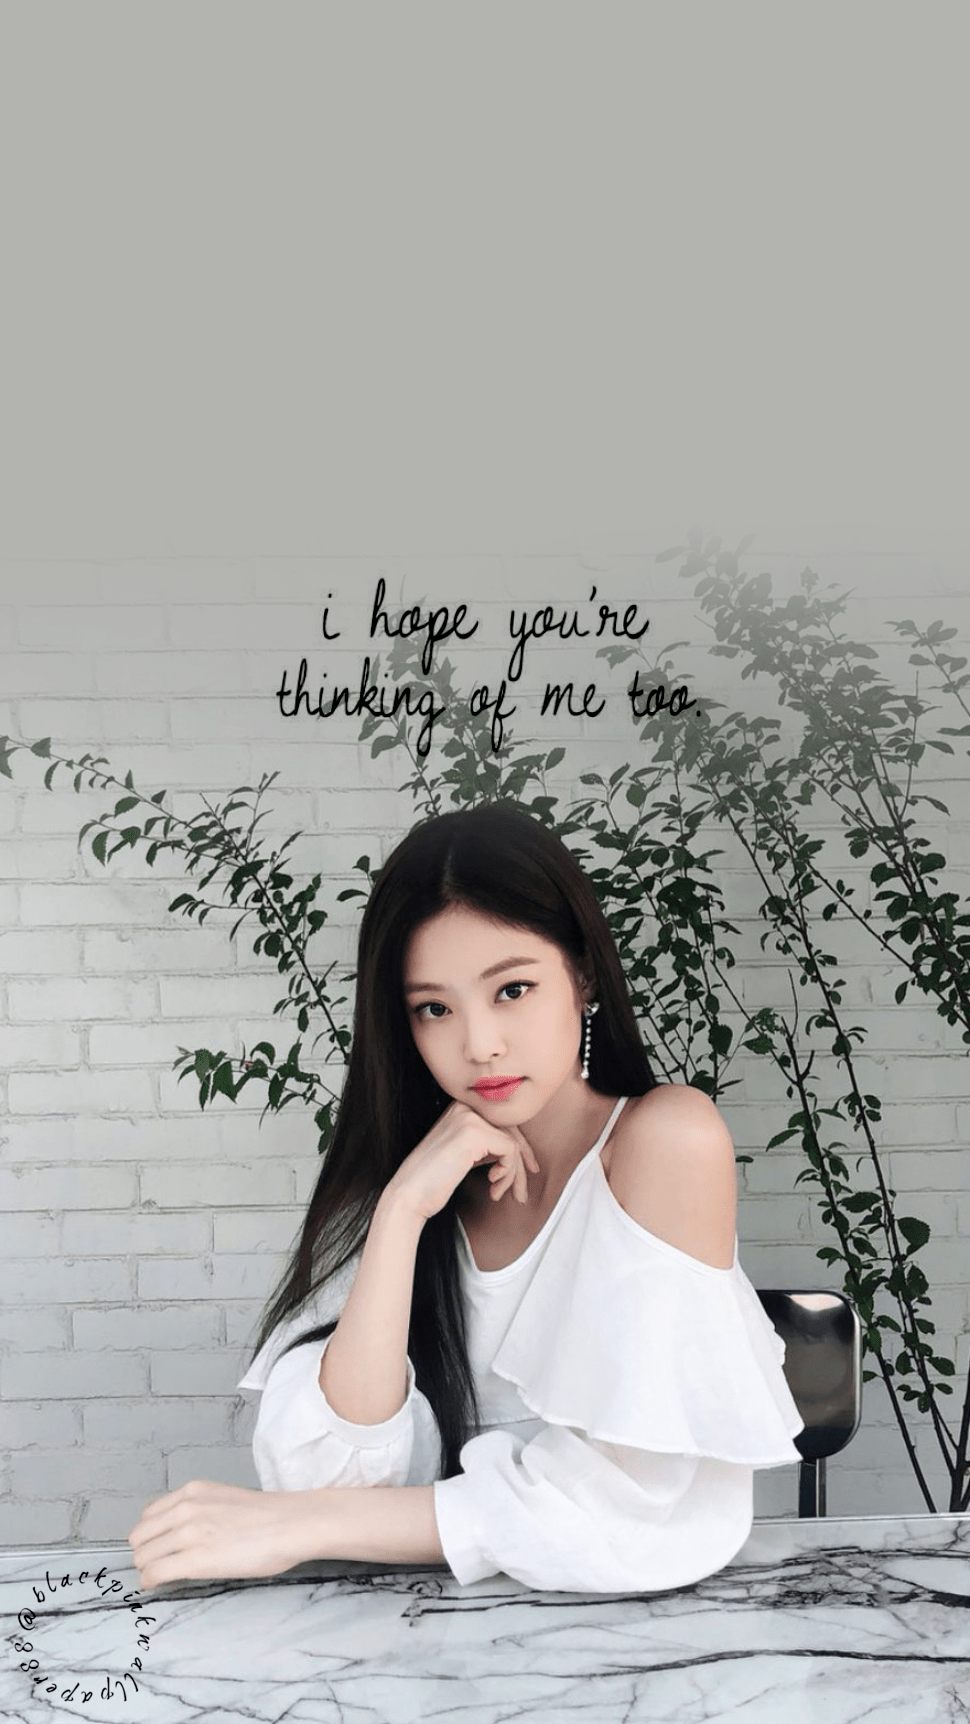 Aesthetic wallpaper of BLACKPINK's Rosé with the quote 